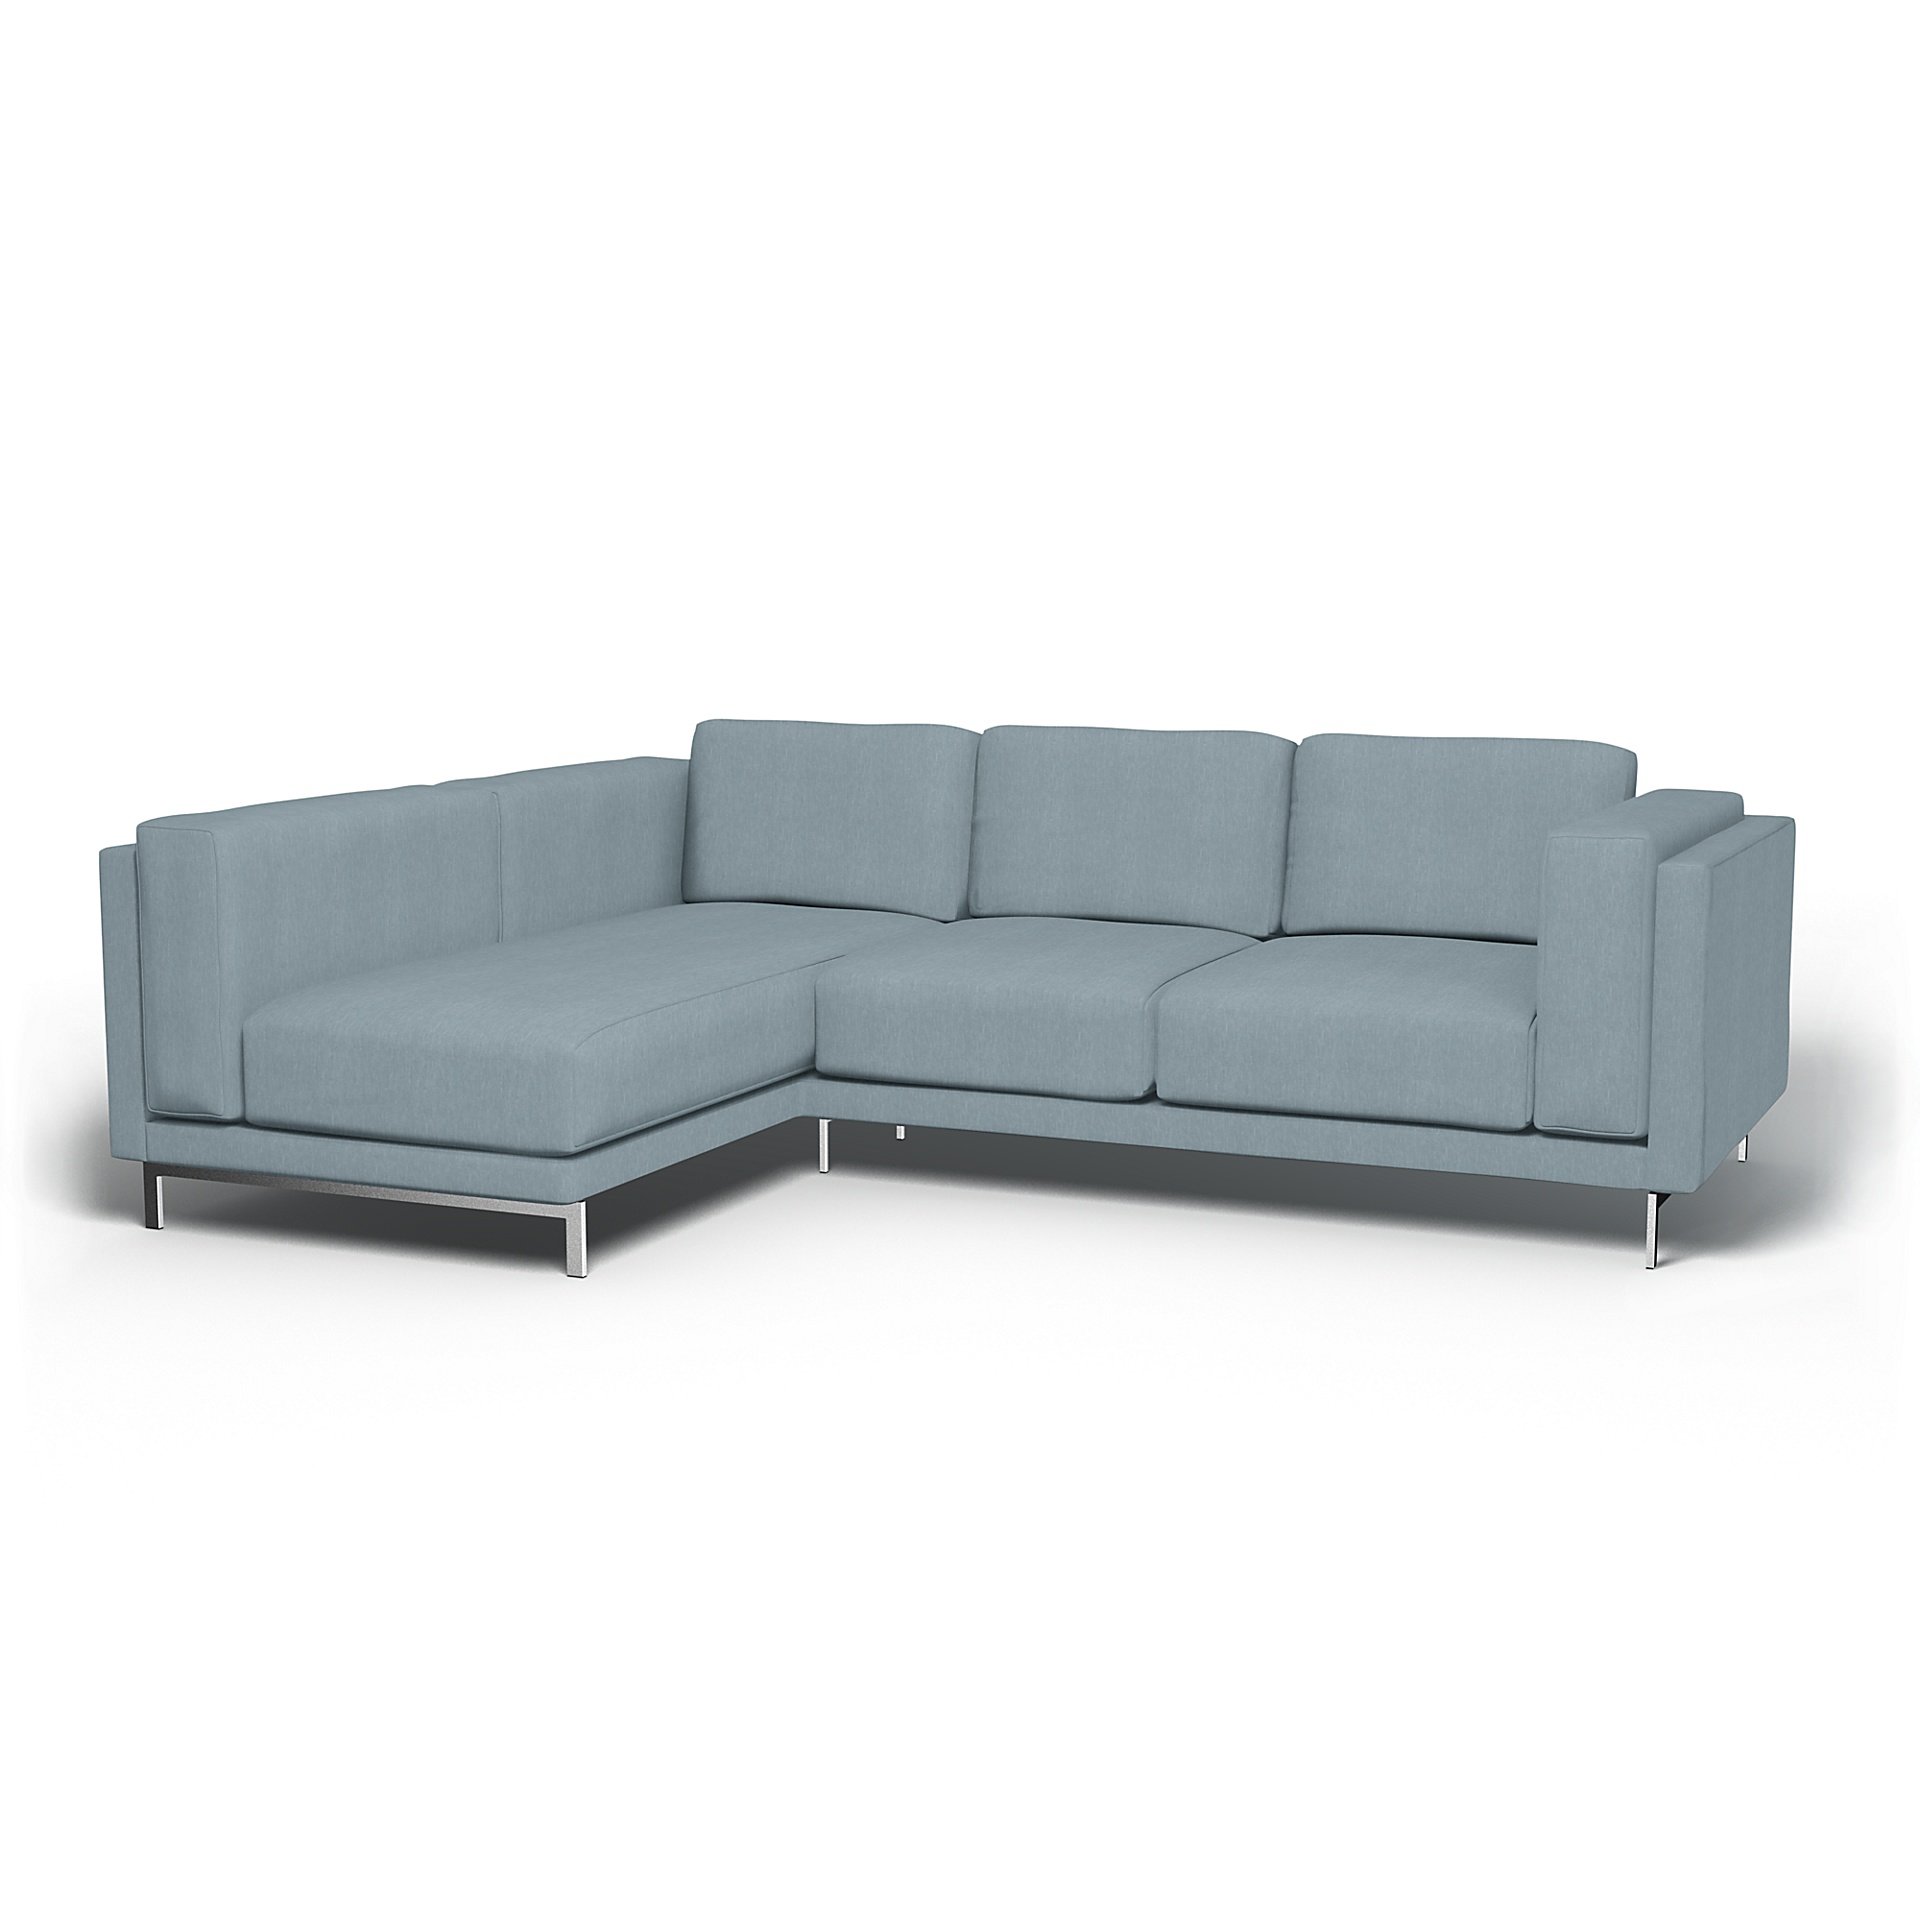 IKEA - Nockeby 3 Seater Sofa with Left Chaise Cover, Dusty Blue, Linen - Bemz